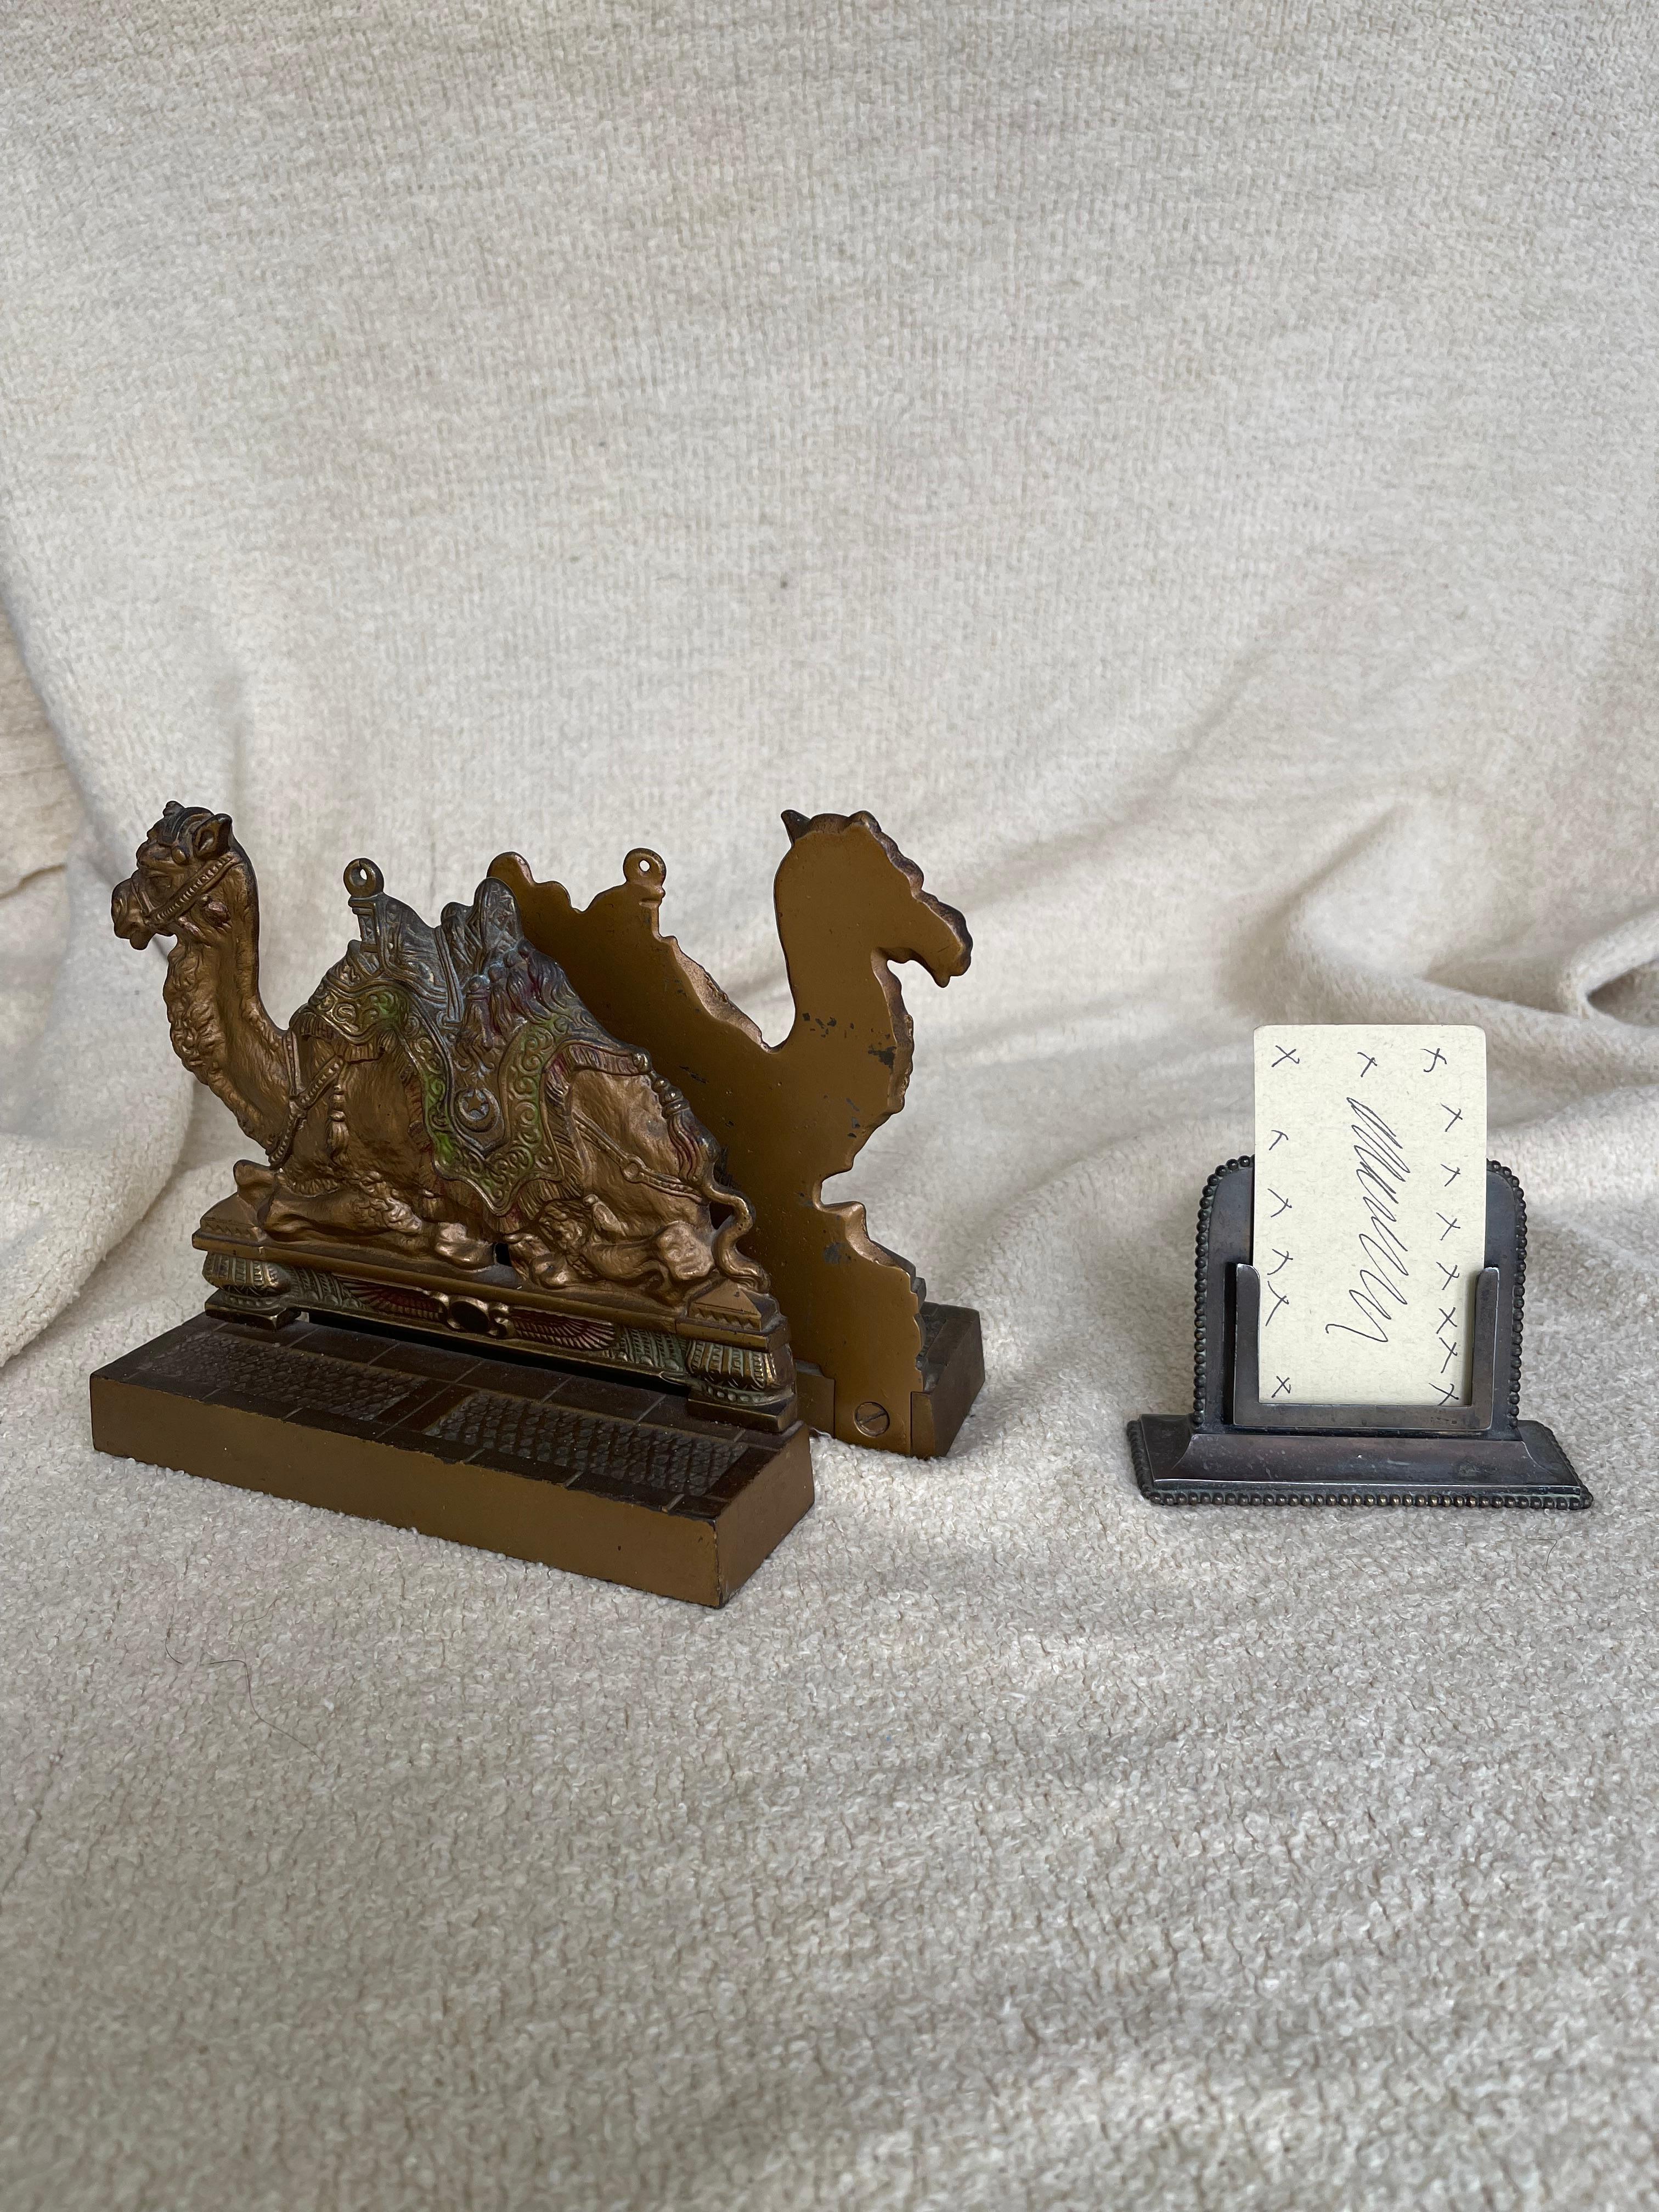  These highly detailed and colorful bookends were made by the Judd Co., one of the most respected makers of bookends in the U.S. They produced many beautiful pairs of bookends in their illustrious career. Looking at the back of these you can see the